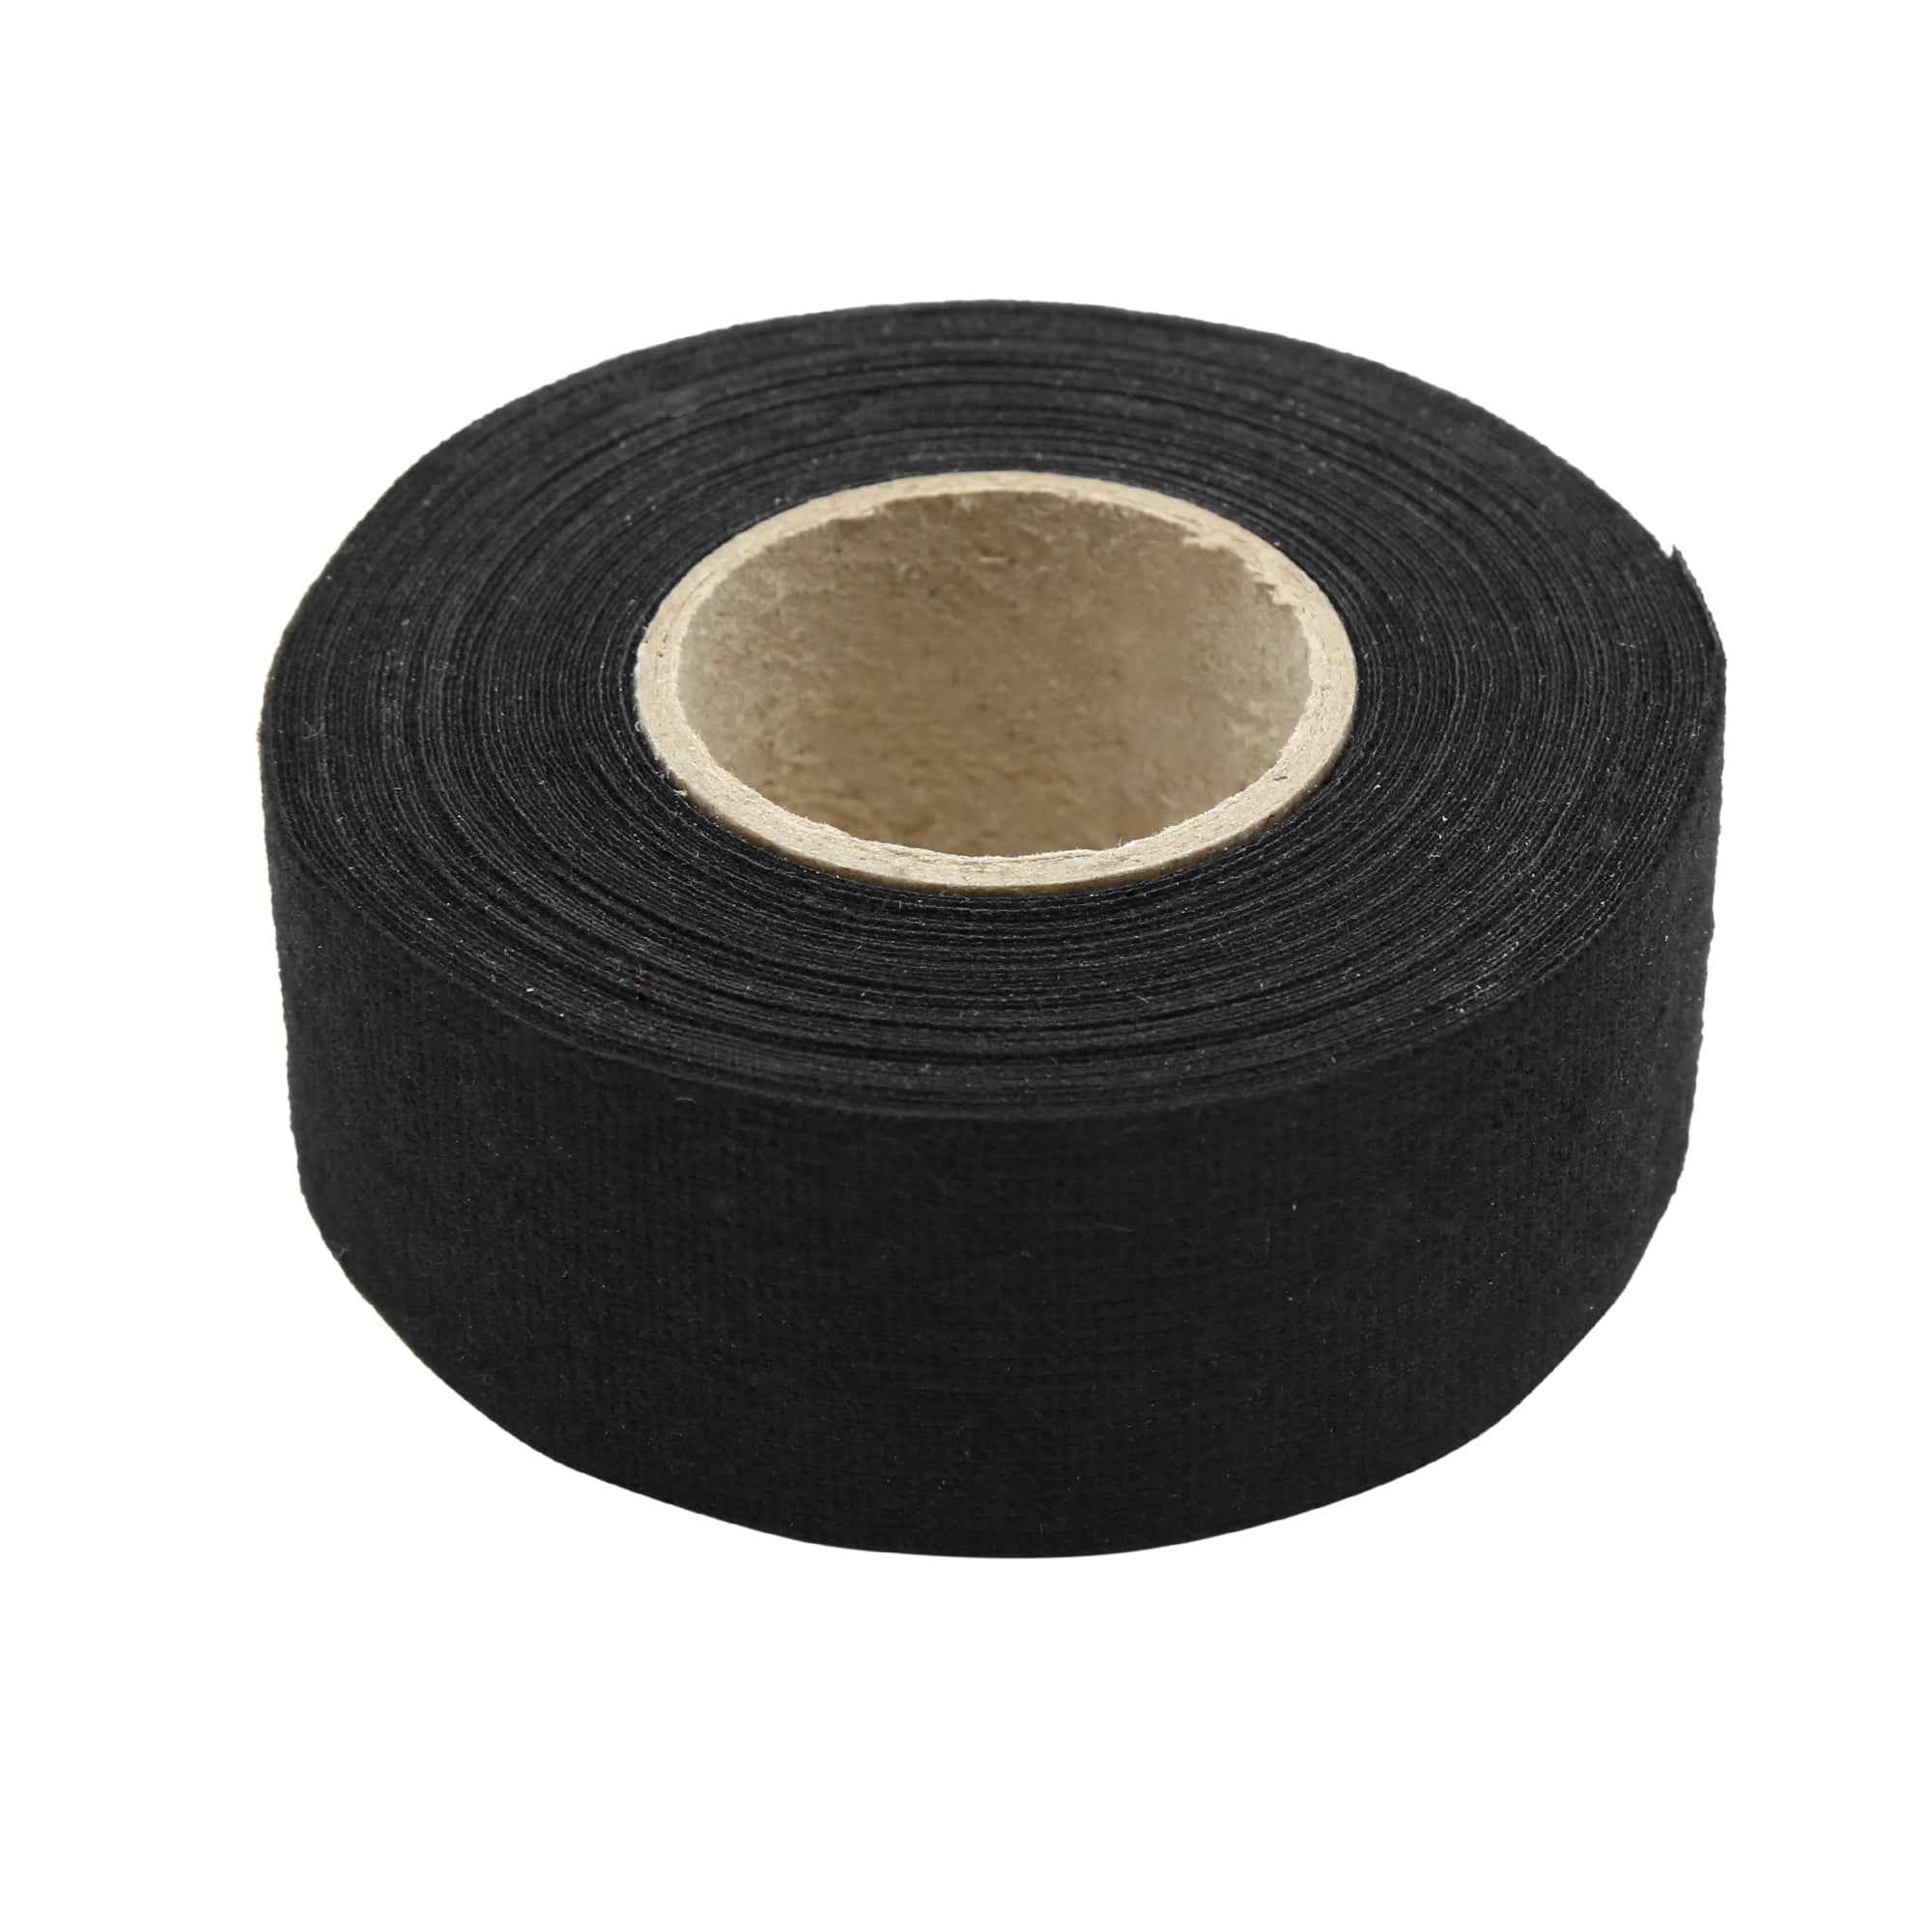 Black 32mm*12m Adhesive Cloth Fabric Tape Cable Looms Wiring Harnes VB, 